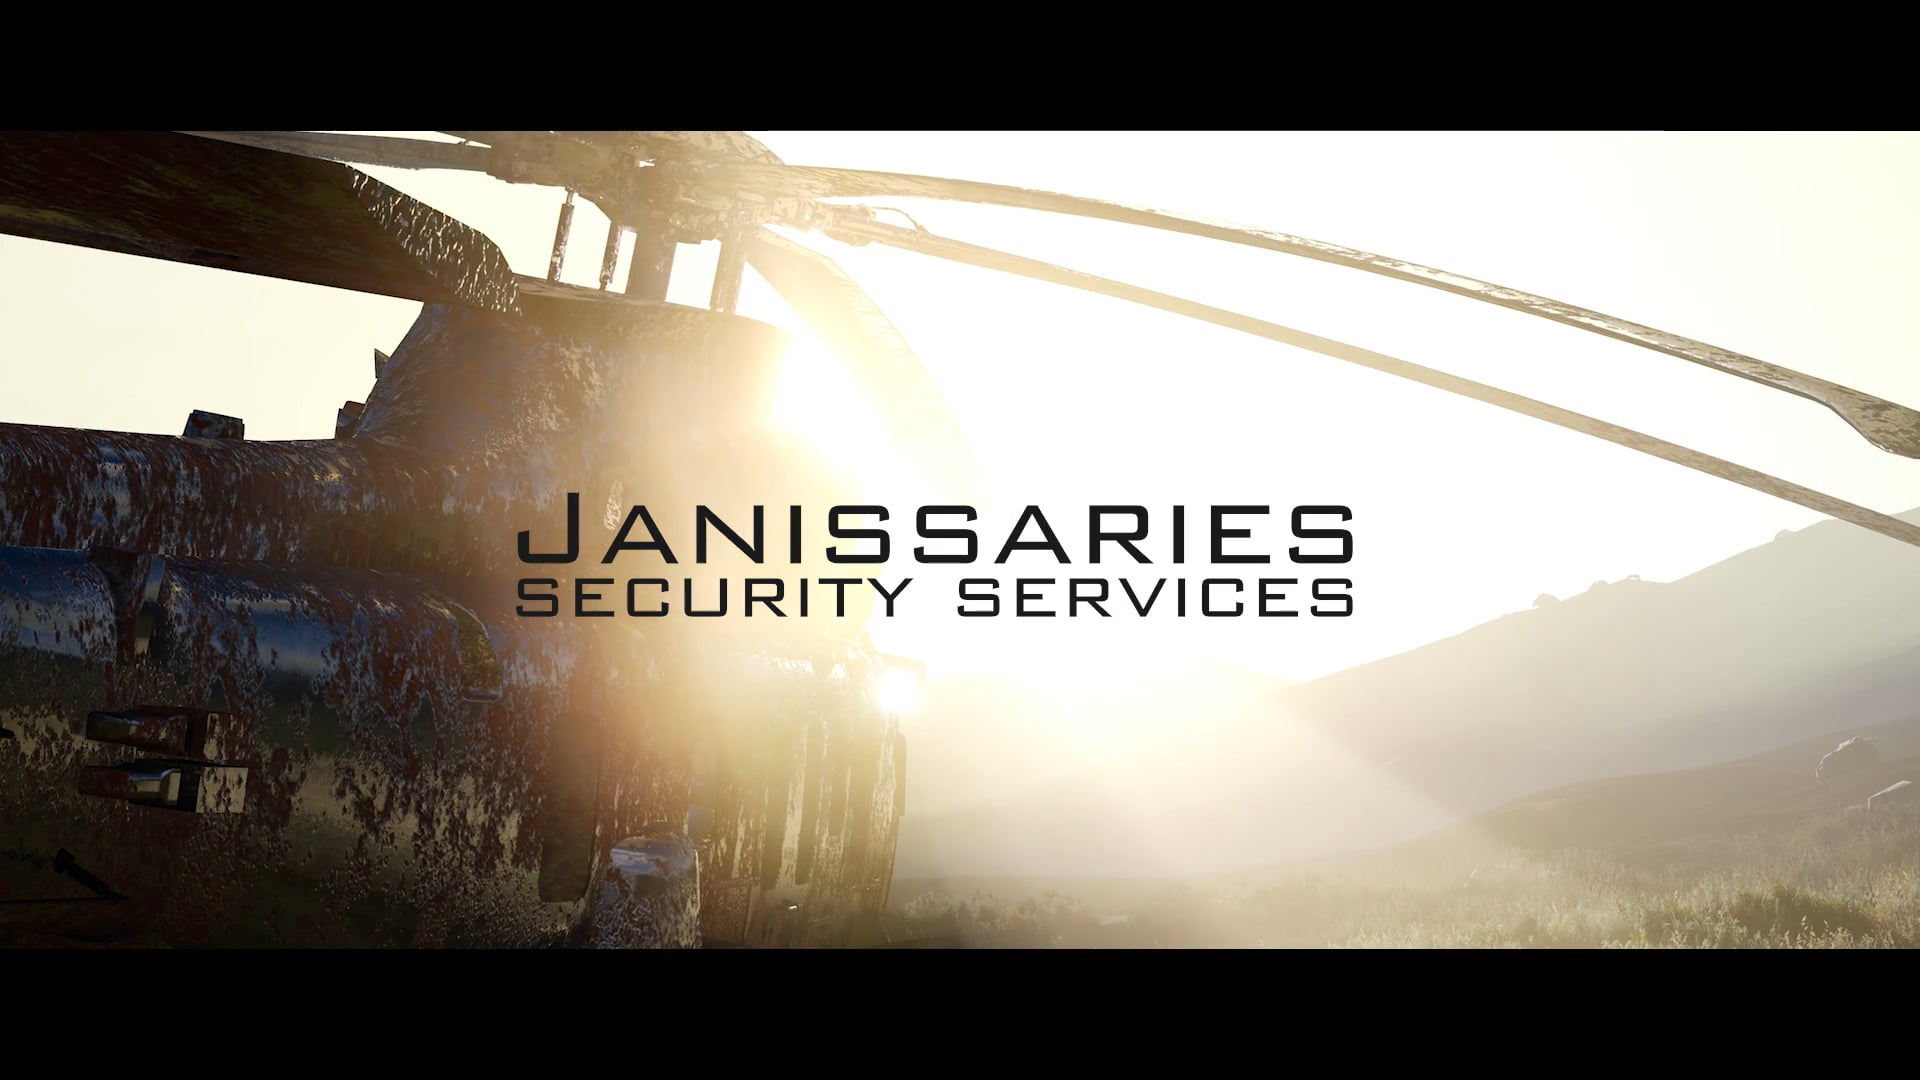 Janissaries Security Services | Commercial Film | Efe Tuncay